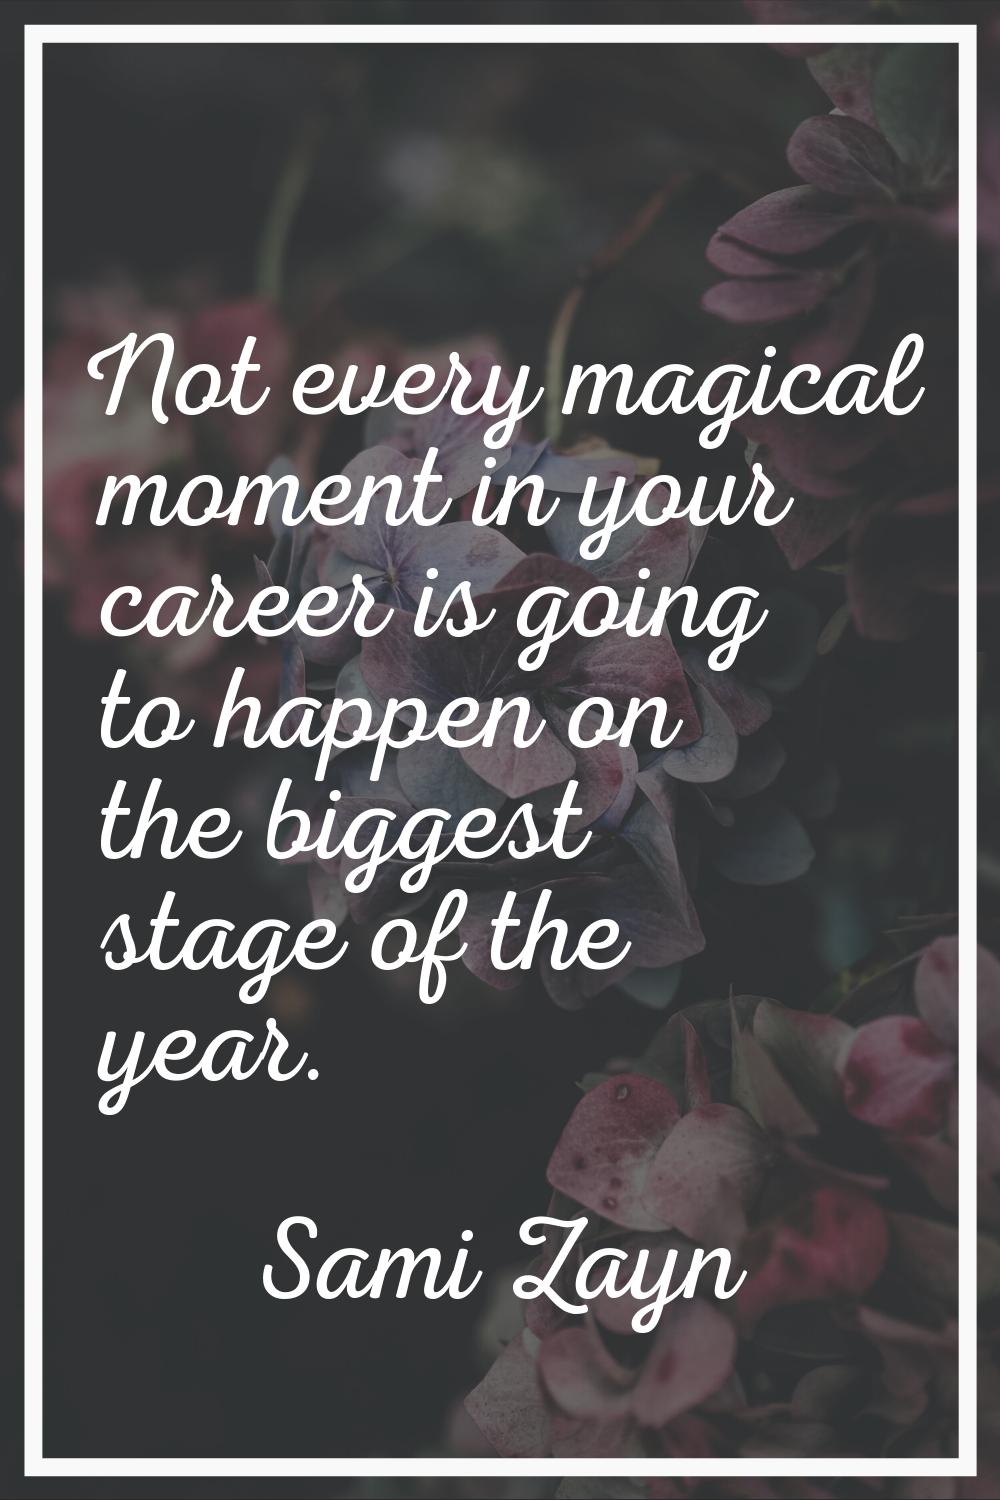 Not every magical moment in your career is going to happen on the biggest stage of the year.